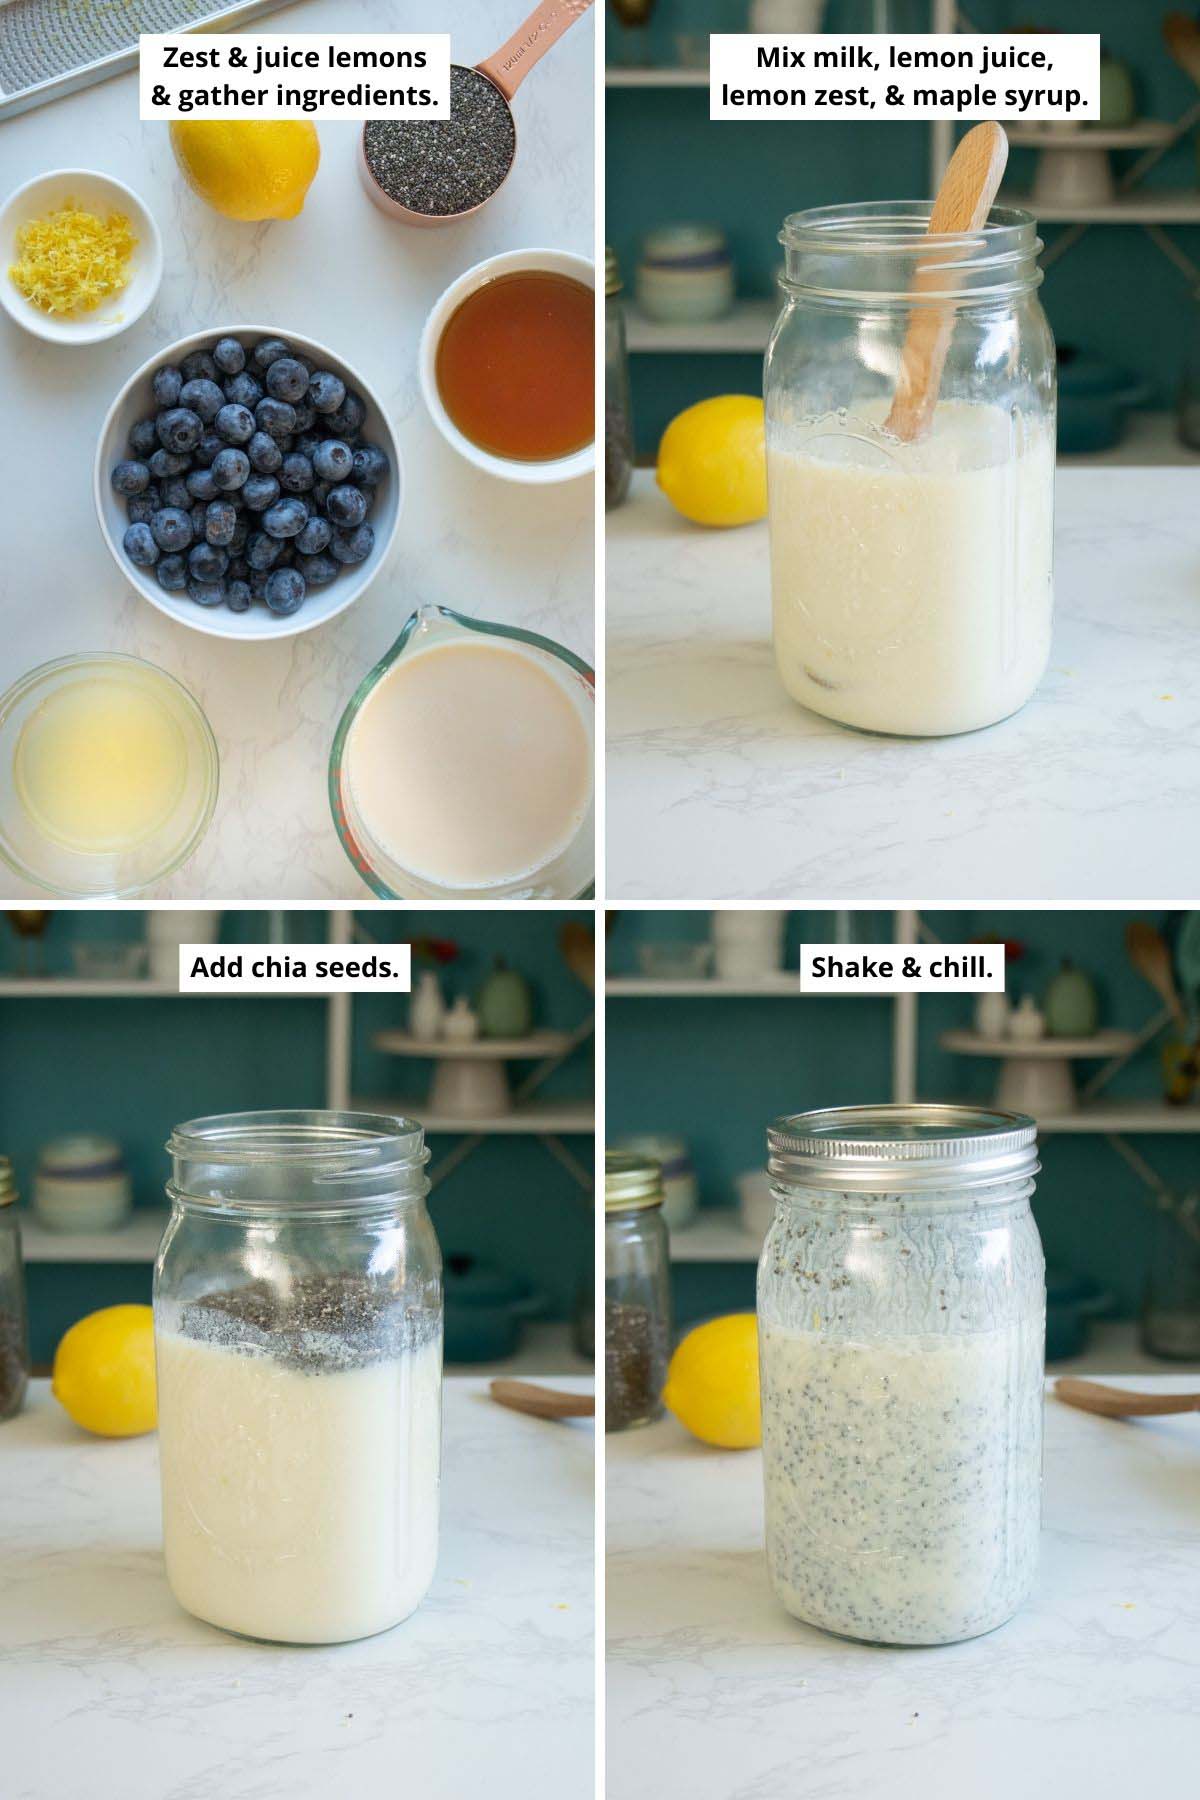 image collage showing the chia pudding ingredients, the liquid ingredients in a mason jar, adding the chia seeds, and the lemon blueberry chia pudding in the jar after mixing in the chia seeds